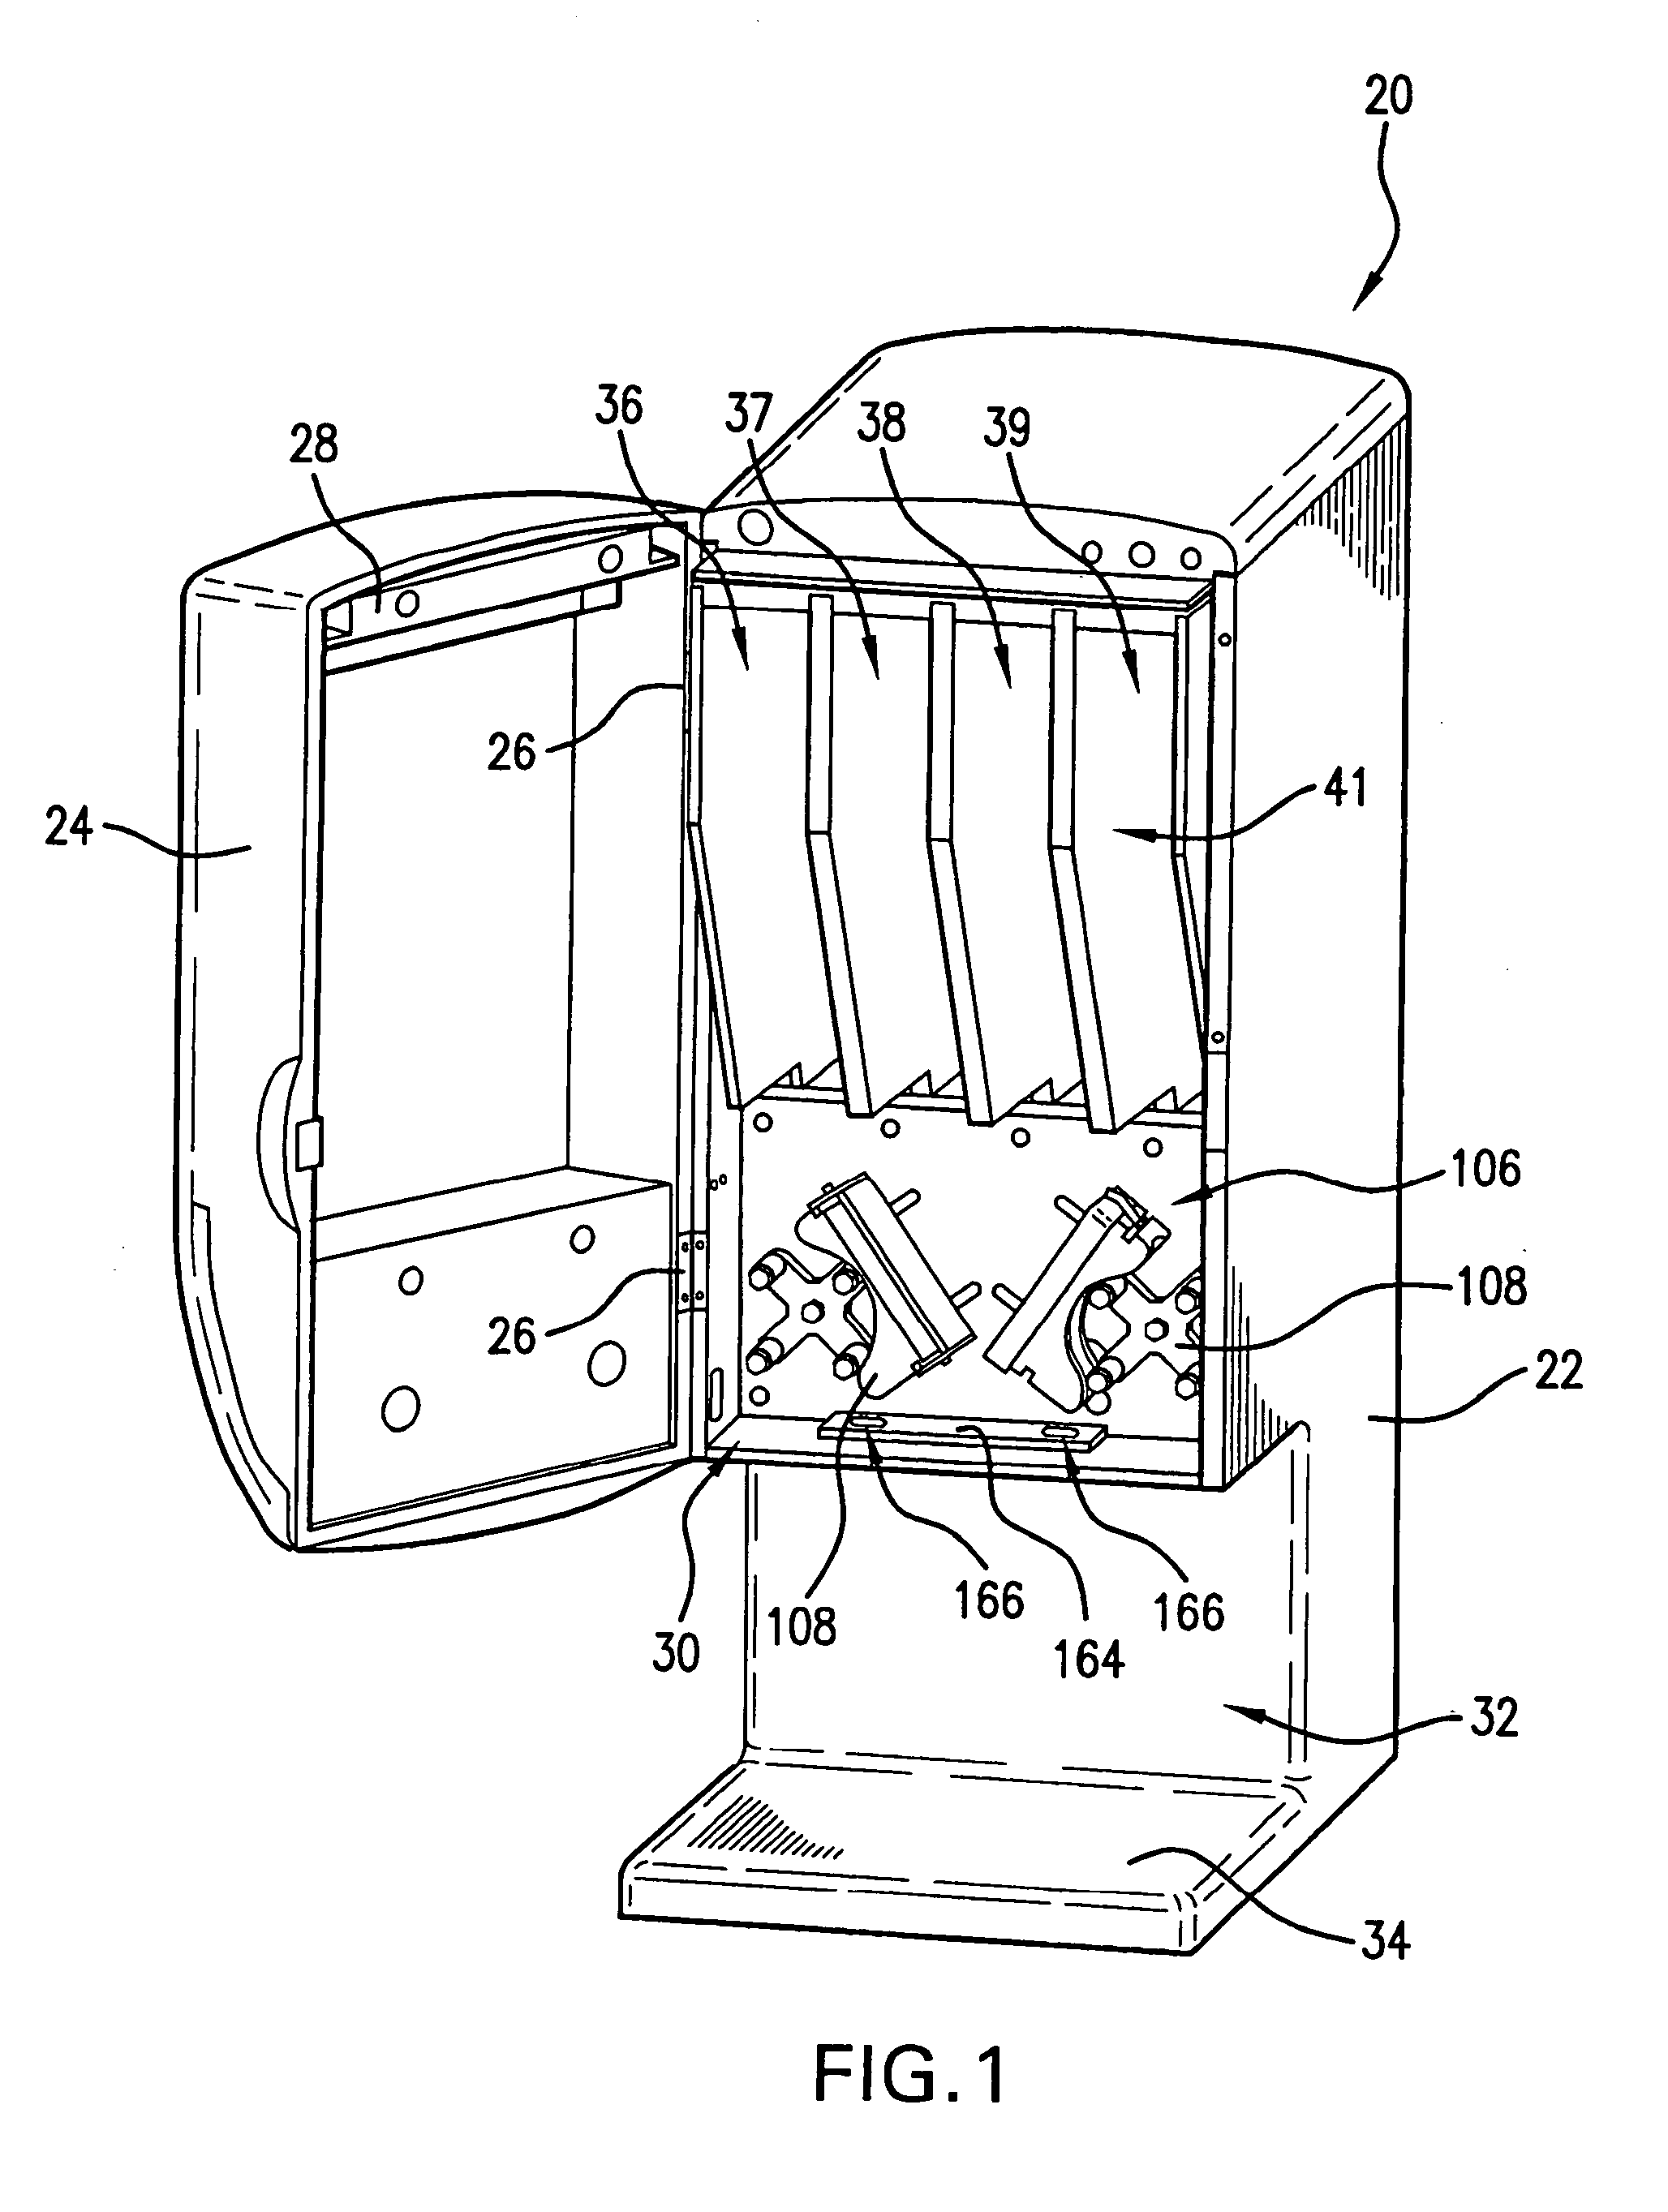 Temperature controlled dispensing device